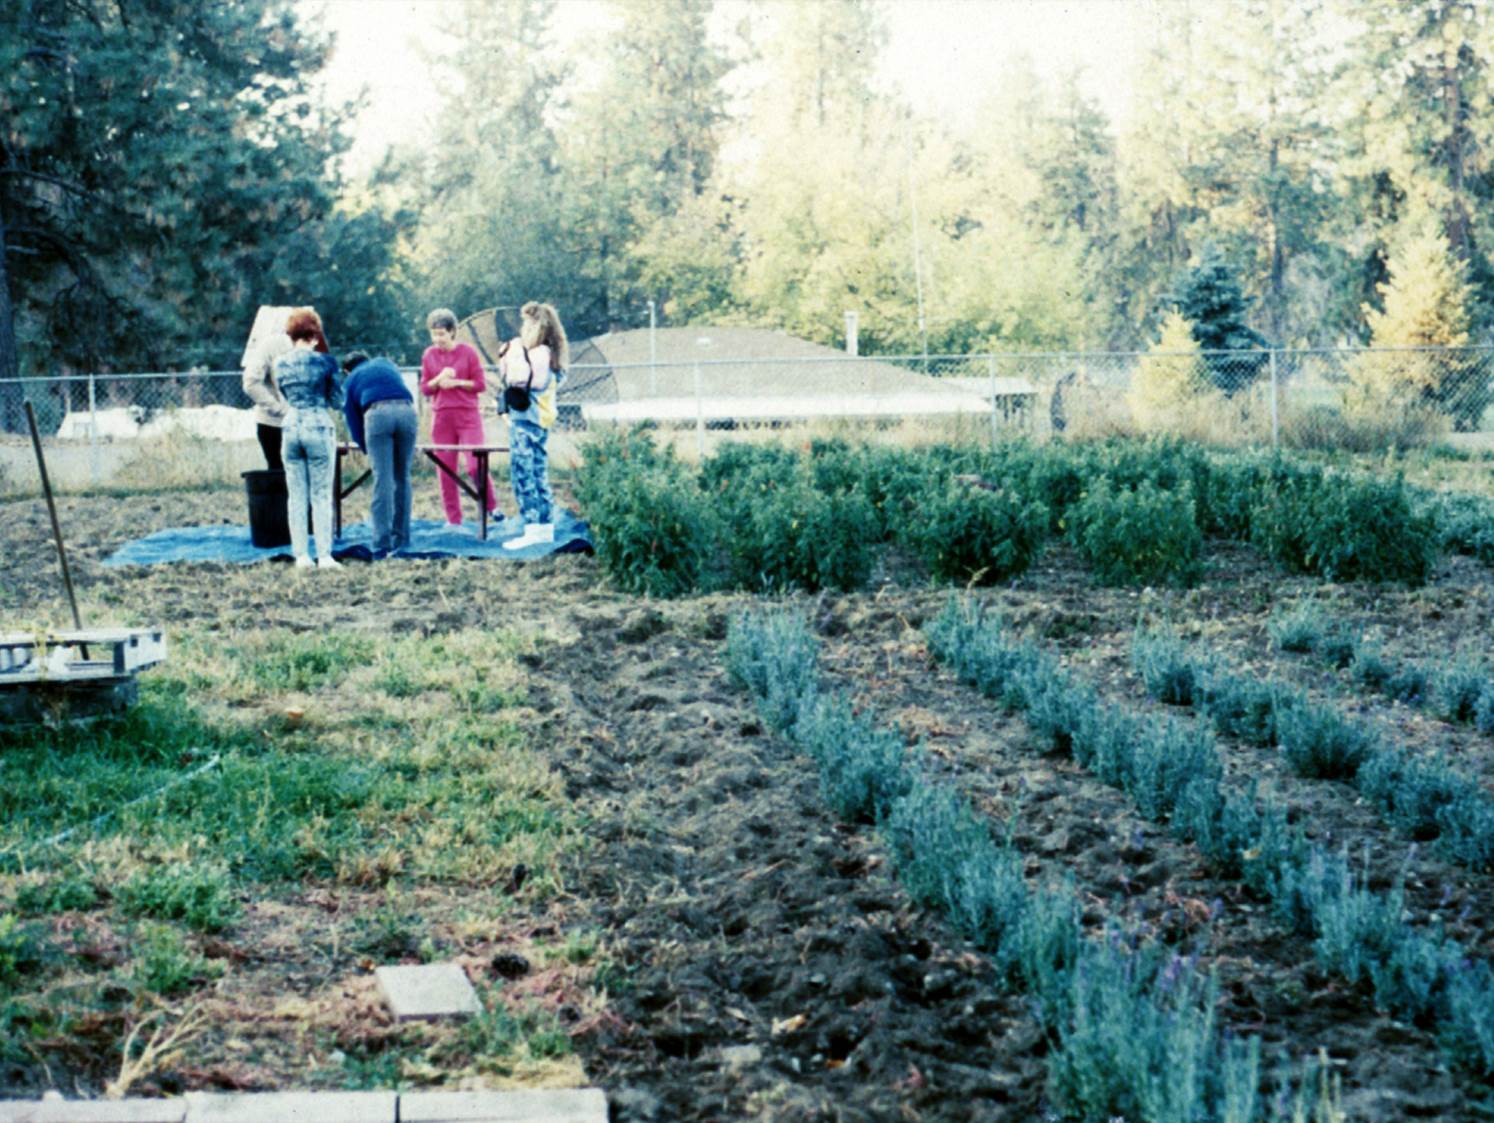 It all started here in Spokane, Washington, on a quarter-acre plot where I planted lavender seeds I brought from France.